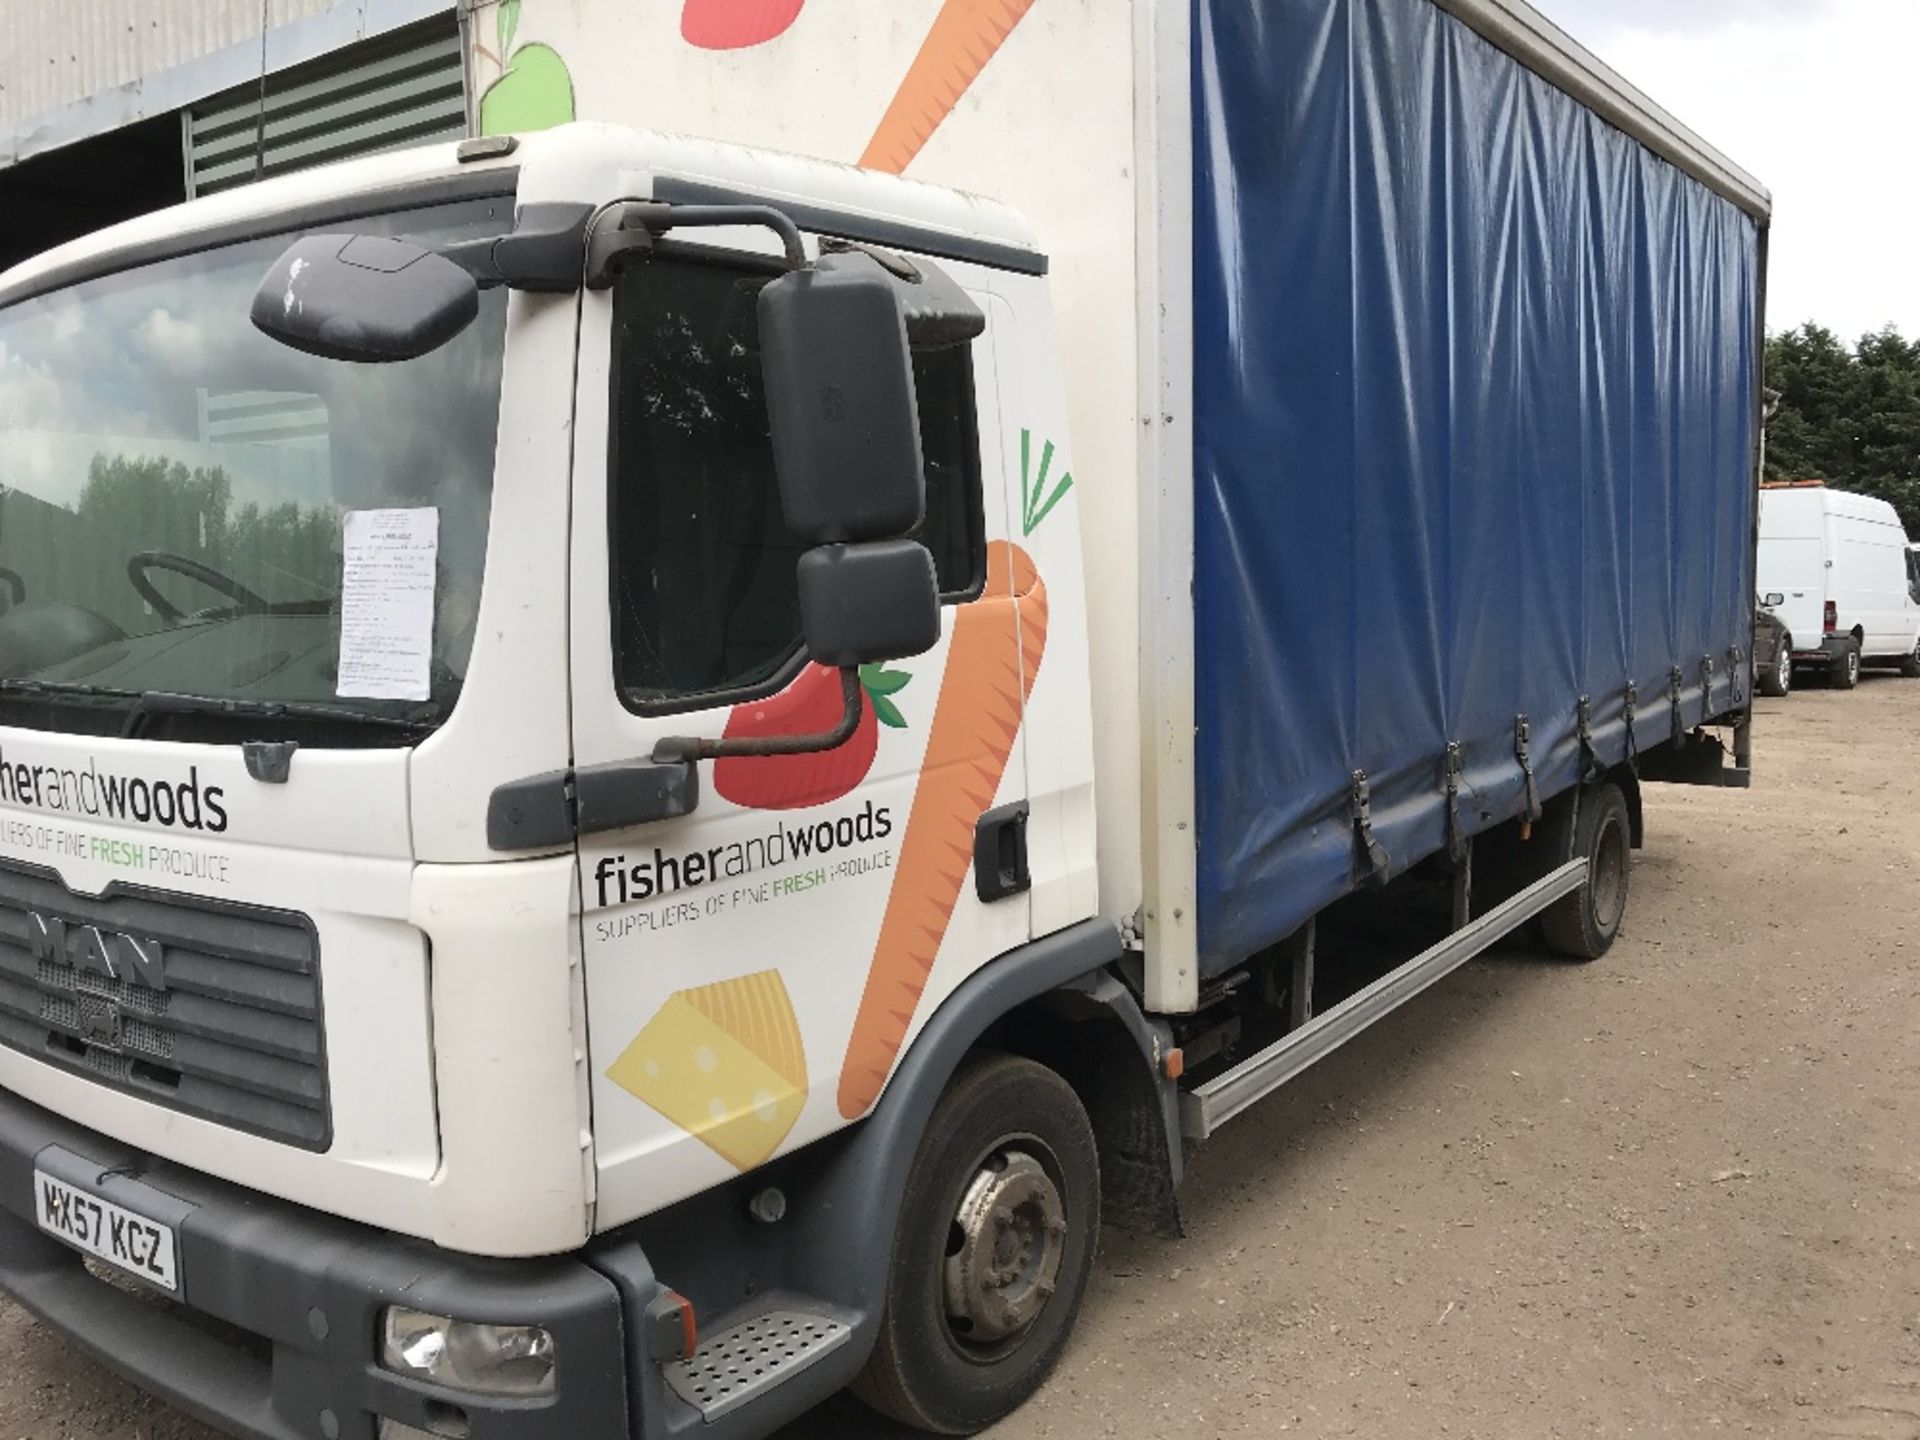 MAN 7.5tonne curtainside lorry c/w manual gearbox, reg. MX57 KCZ. WHEN TESTED WAS SEEN TO DRIVE,